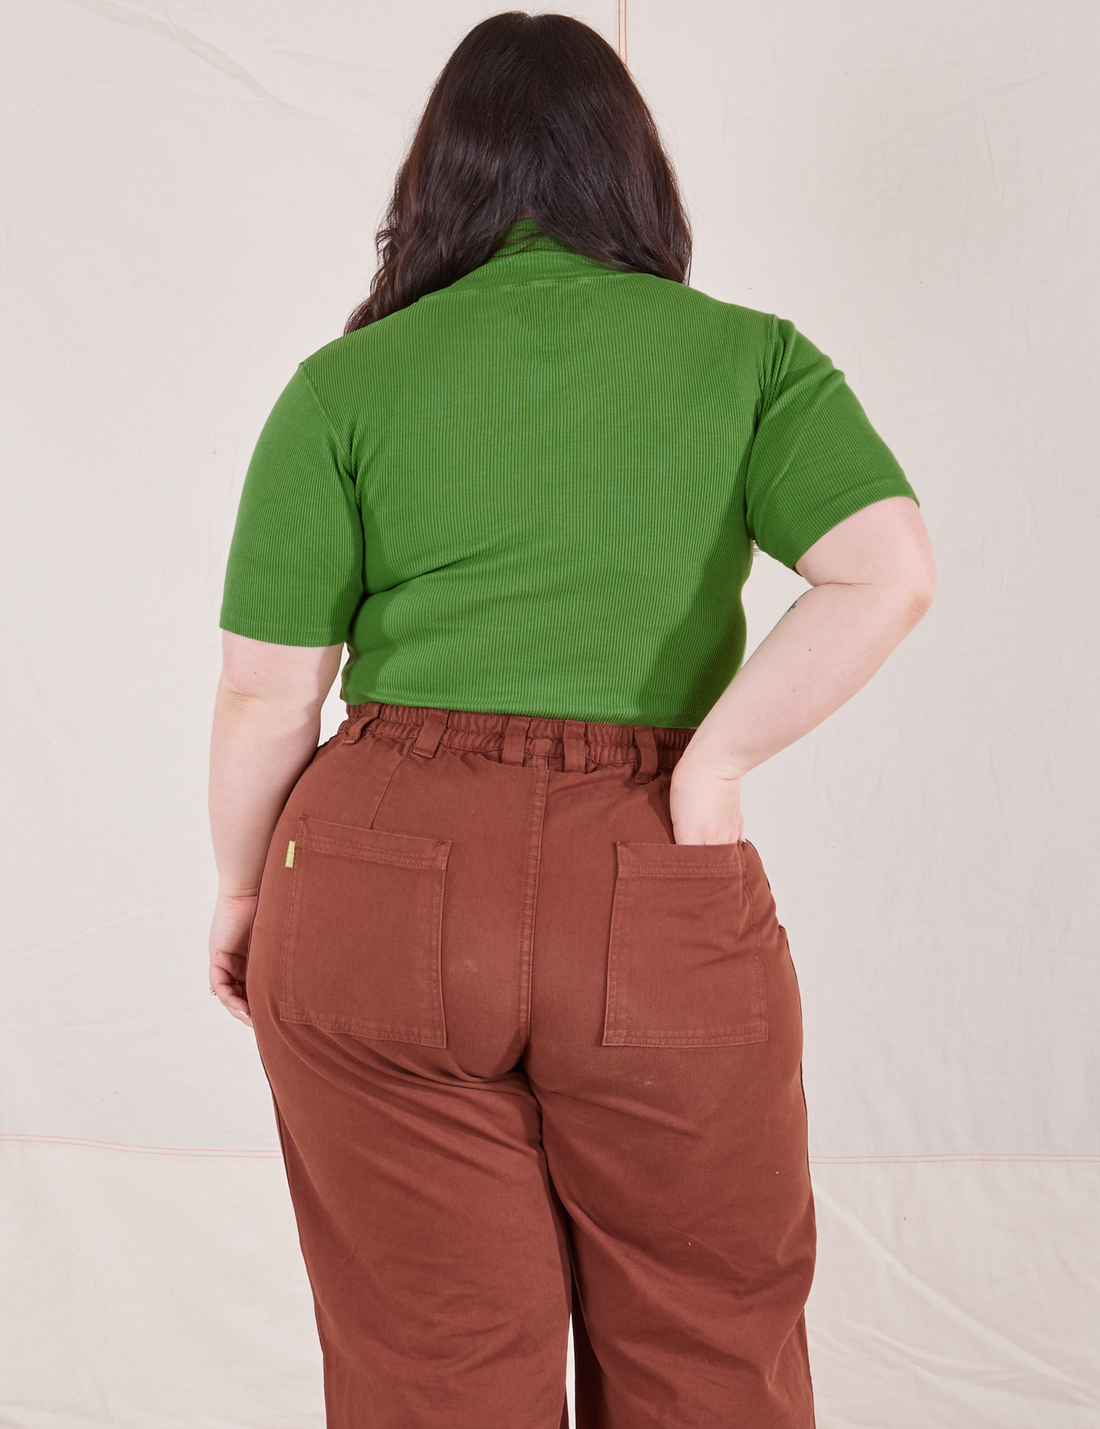 1/2 Sleeve Essential Turtleneck in Bright Olive back view on Ashley wearing fudgesicle brown Bell Bottoms. Ashley has her hand in the back pocket.